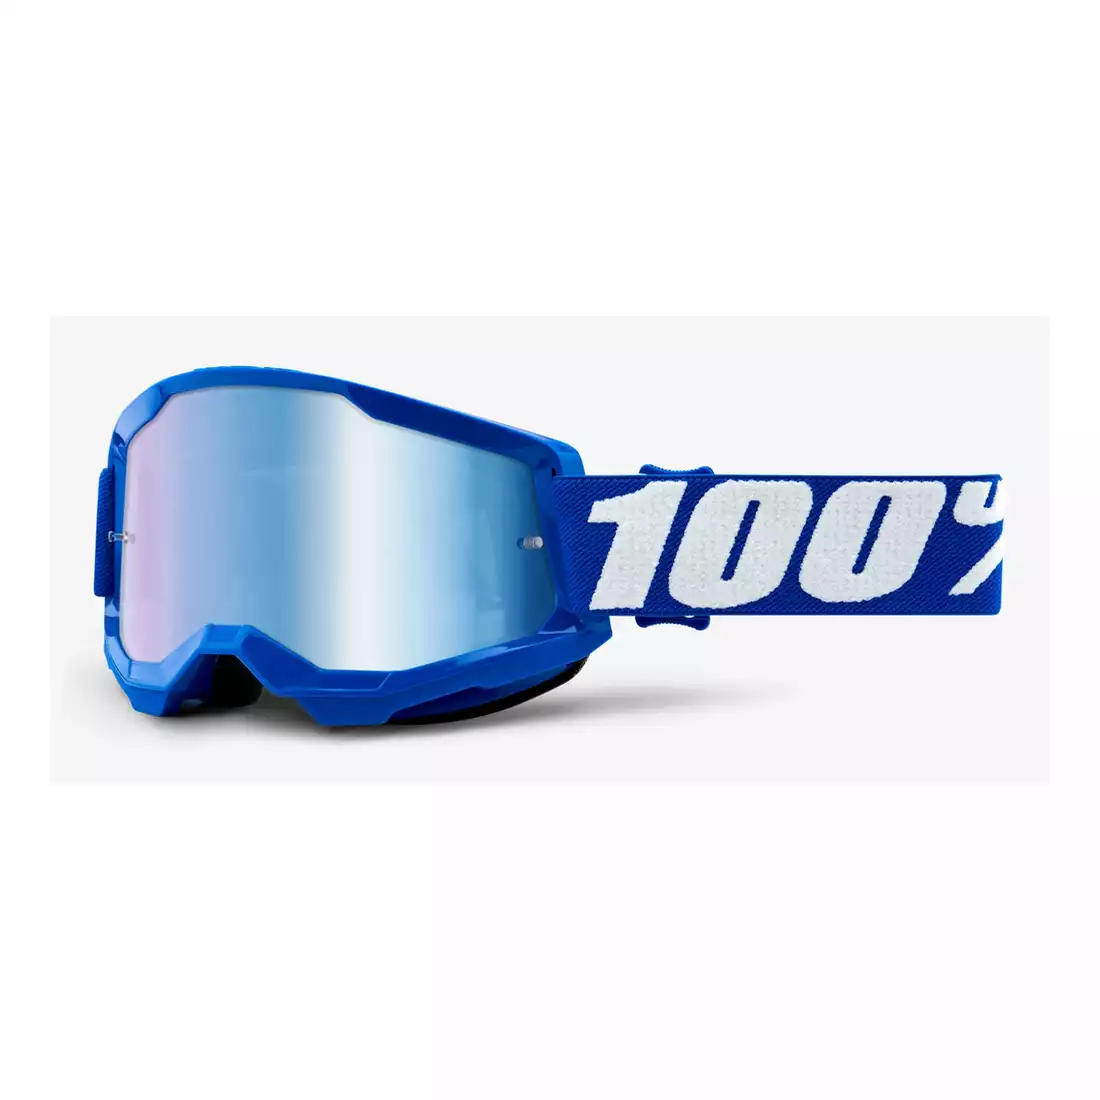 Mirror Blue Lens 100% Accuri 2 Bicycle Cycle Bike Goggle Blue 